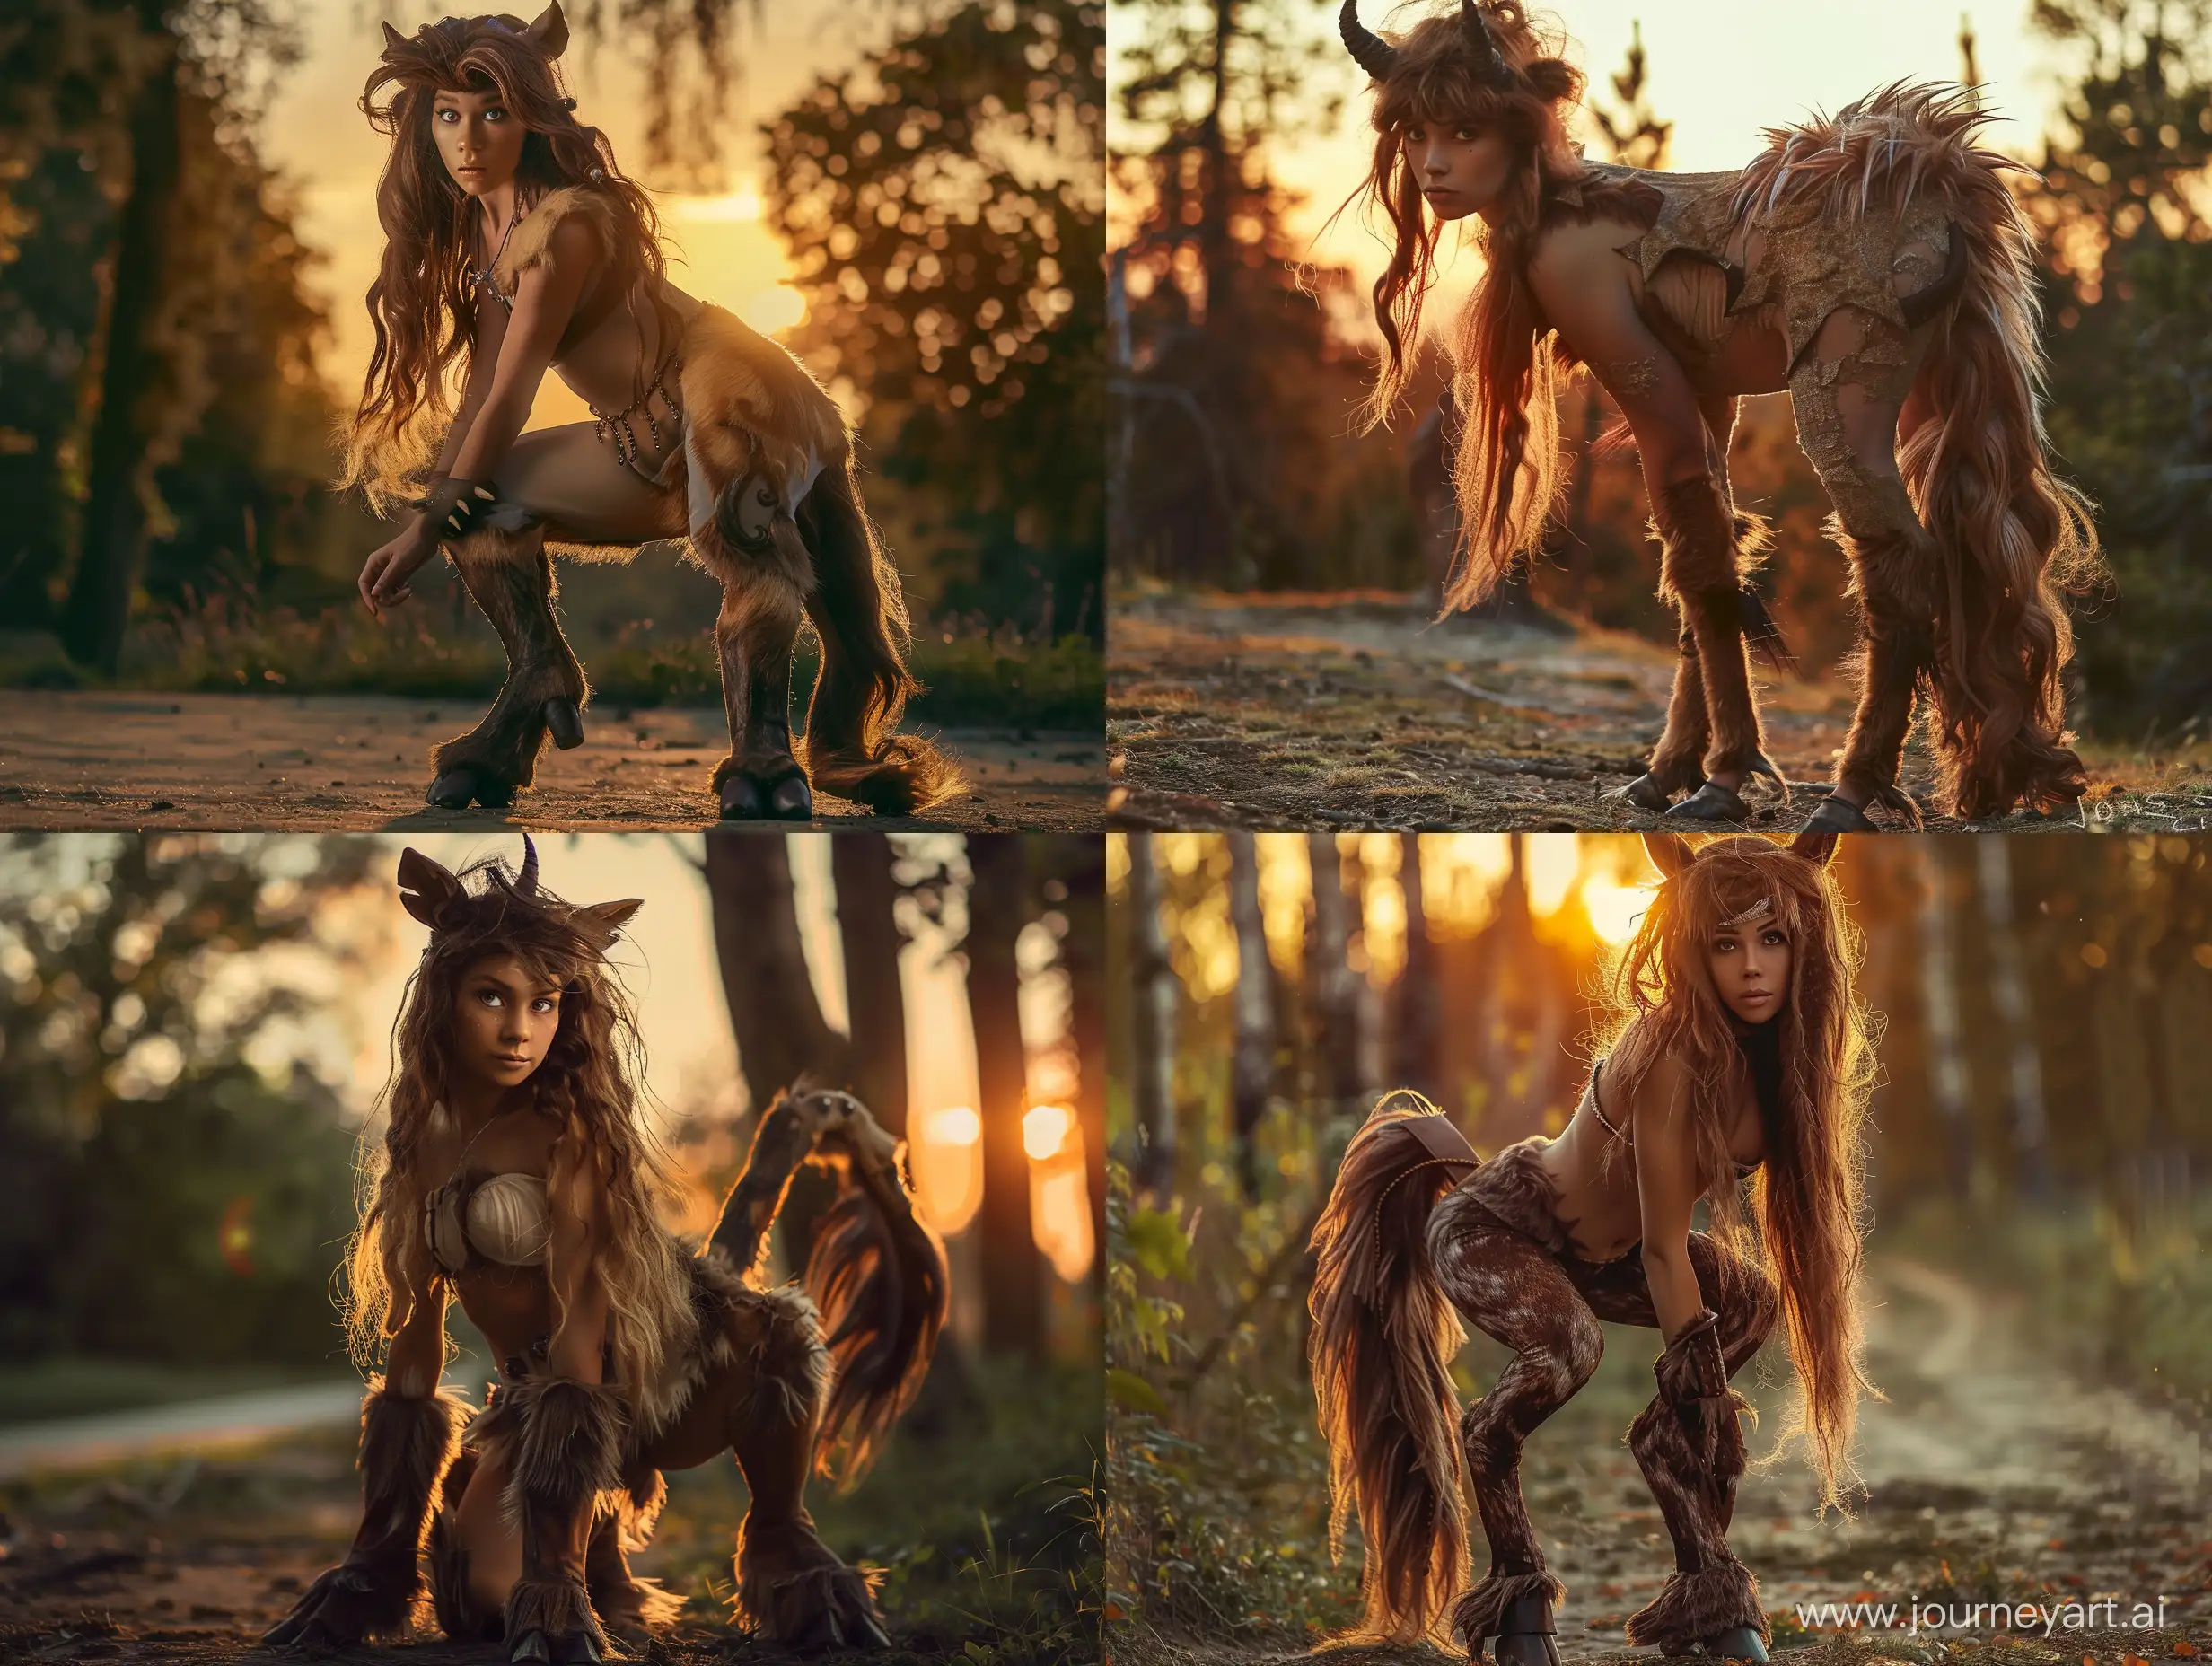 A photograph of a female centaur. She has loose brown hair. She has hooves, fur and a tail. She is standing on all fours in a forest at sunset.